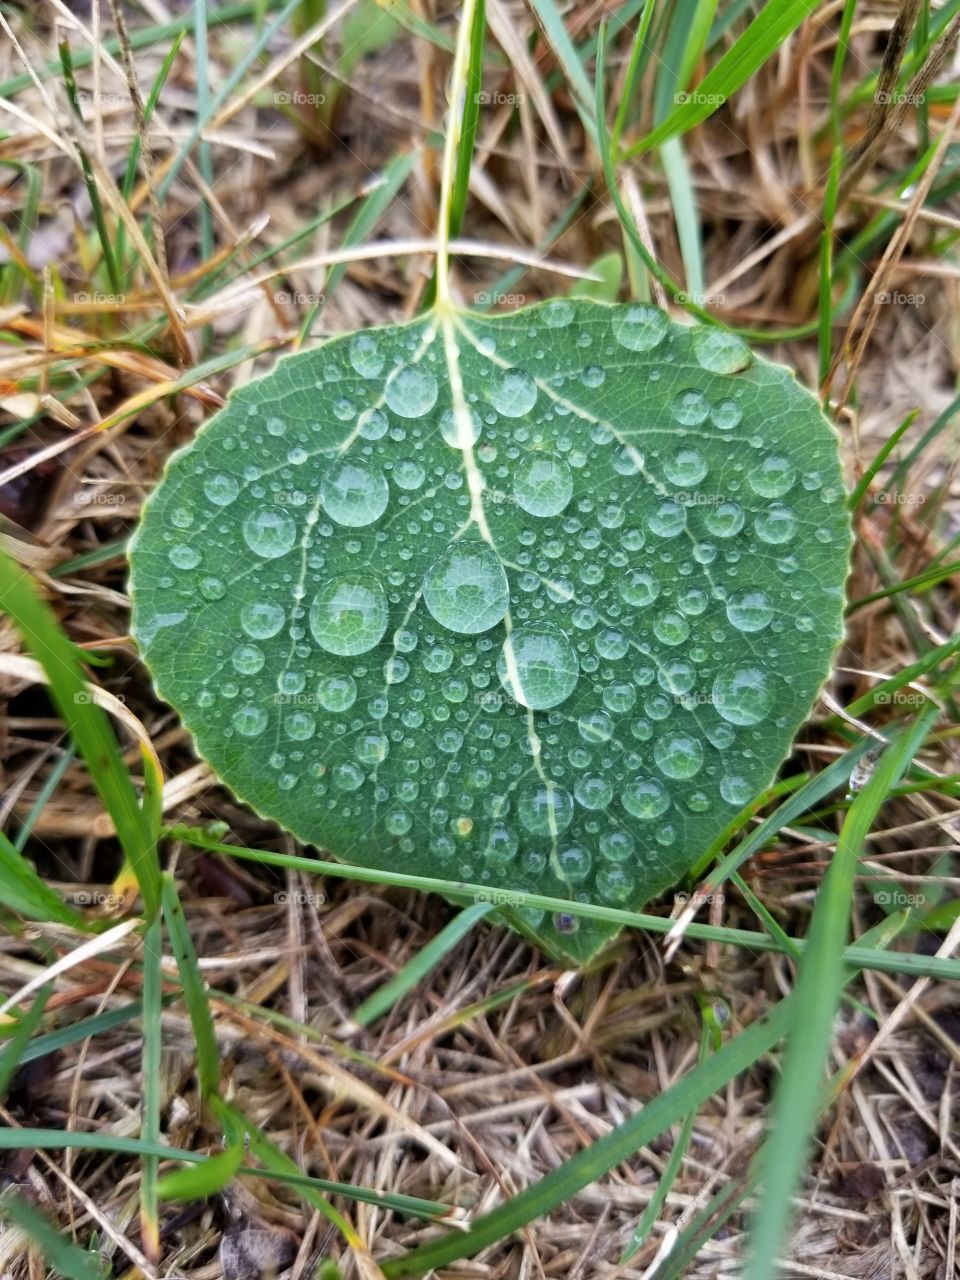 A leaf sitting peacefully in nature after a soft rainfall in the summertime.